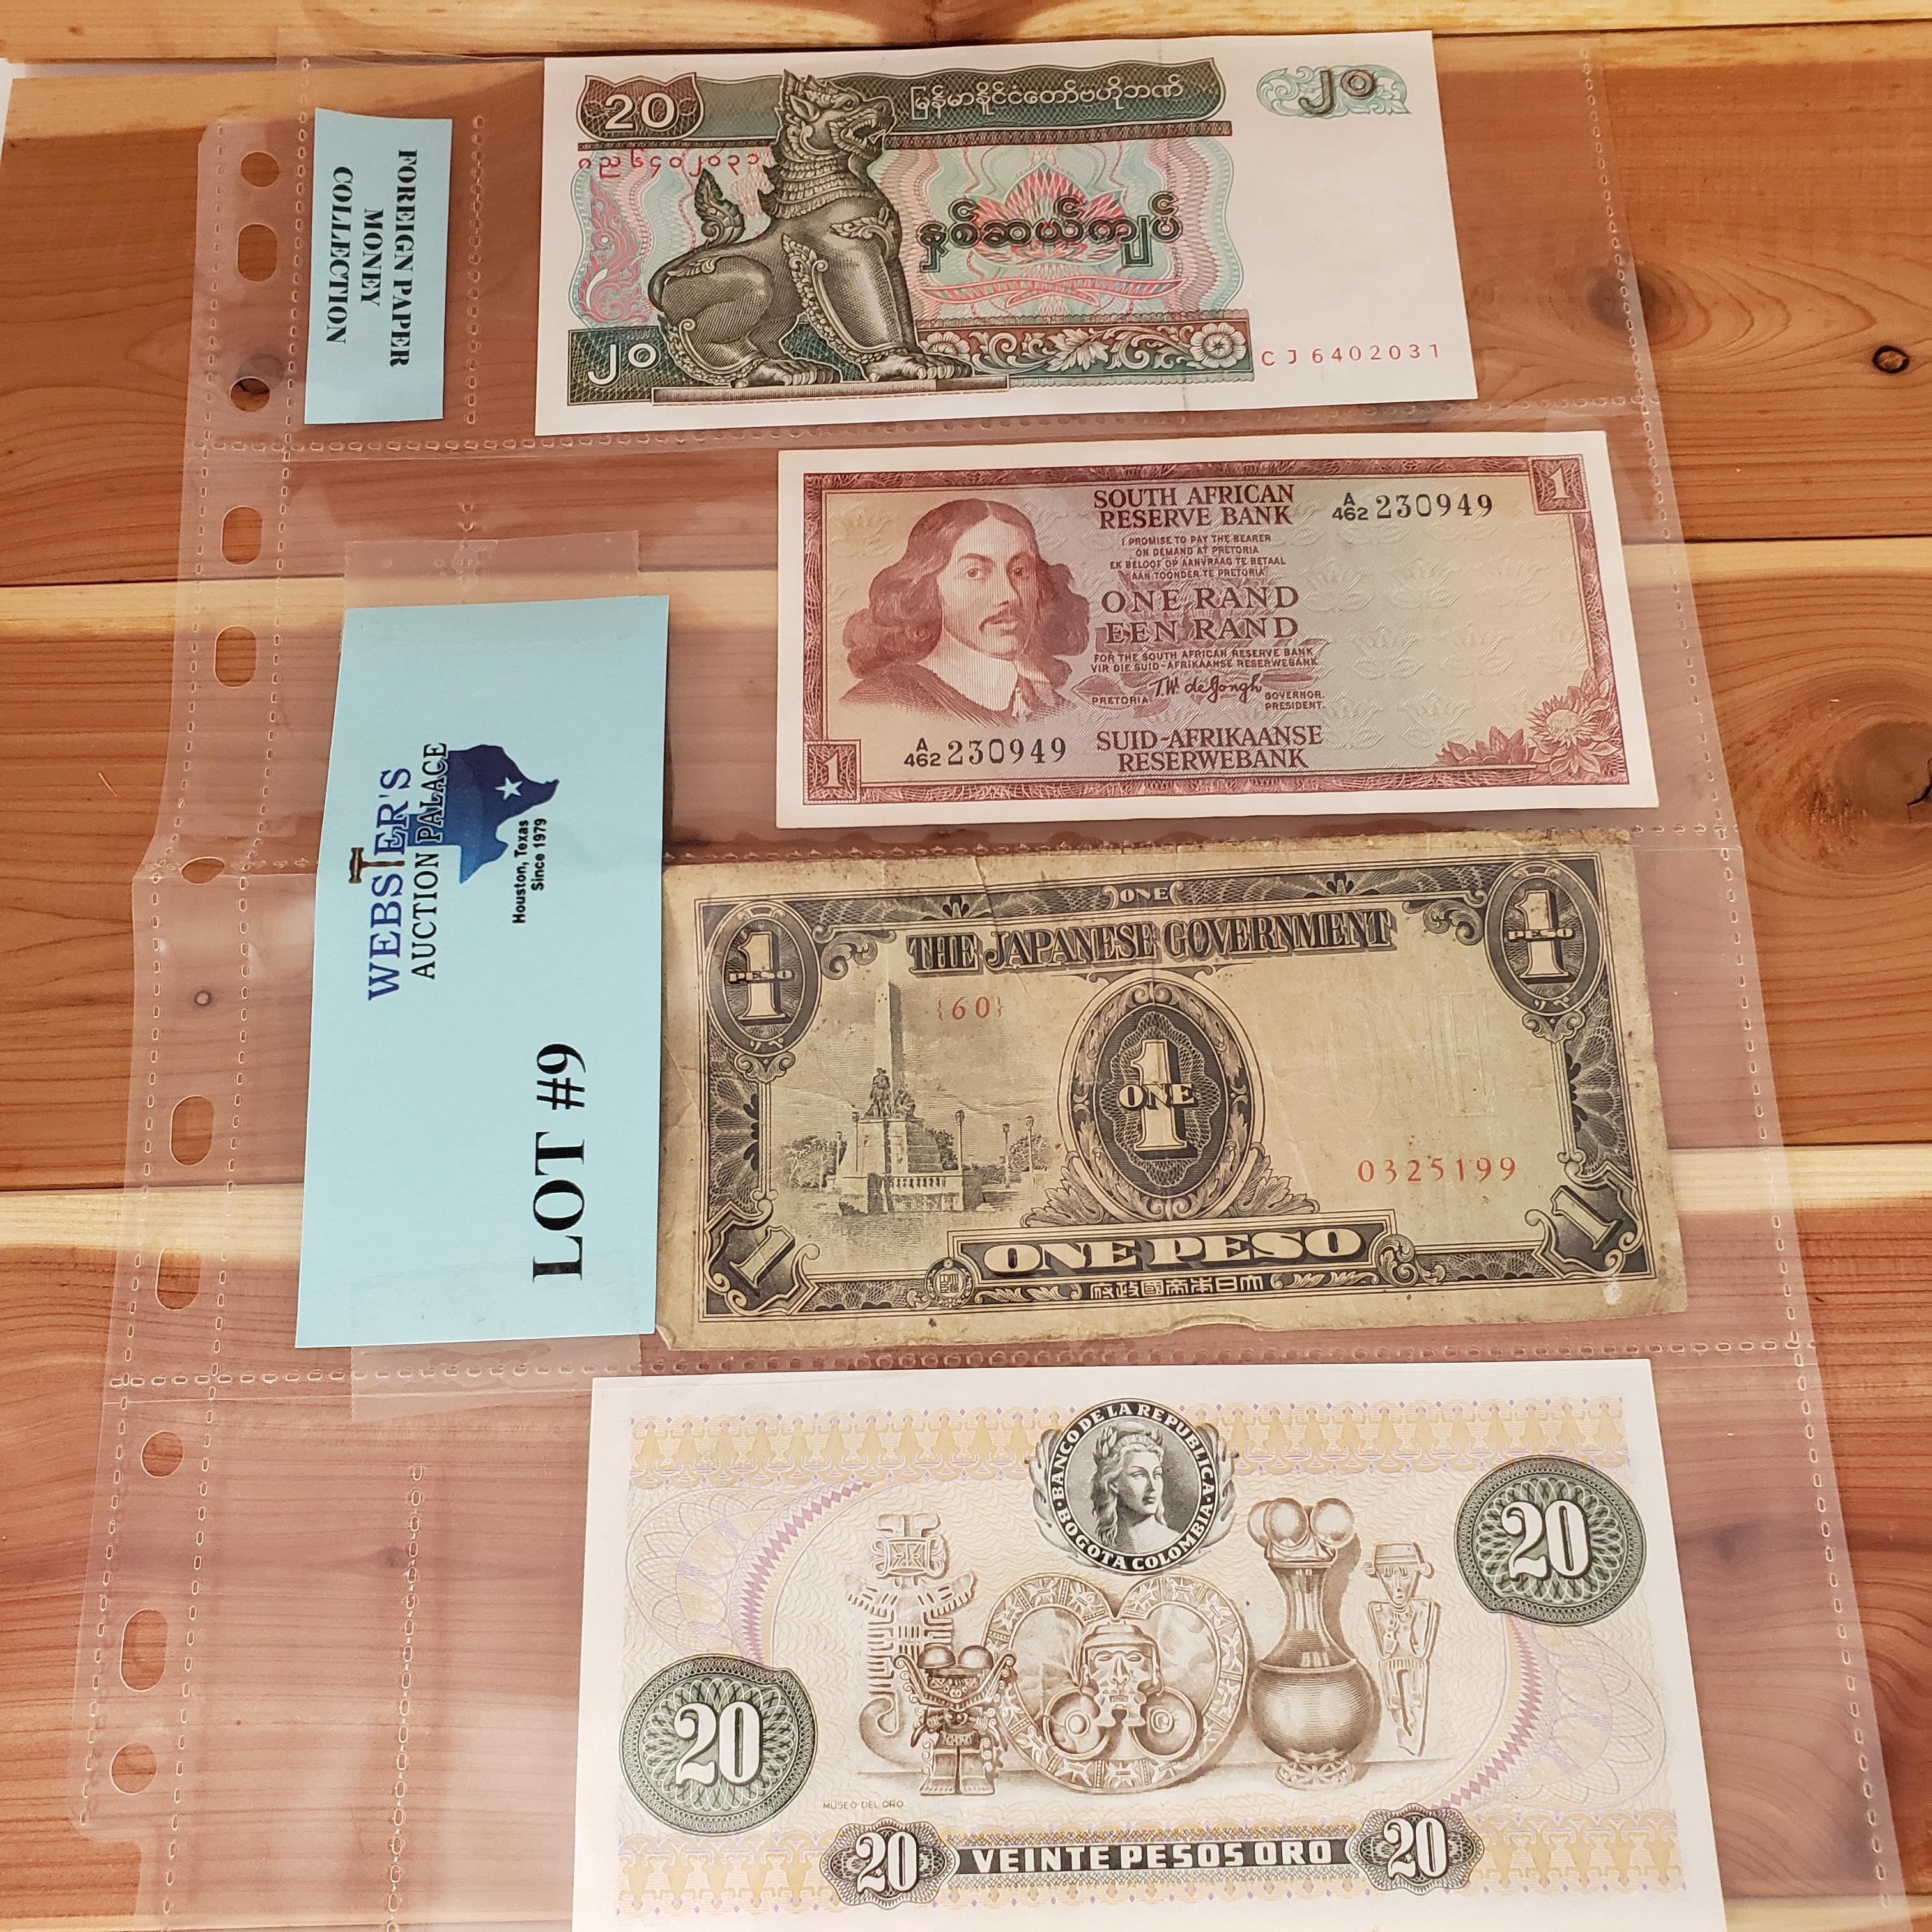 LOT OF U.S. BILLS, SILVER CERTIFICATE, BARR NOTE, 1976 $2 NOTE, 24KT STAMP, SPORTS CARDS